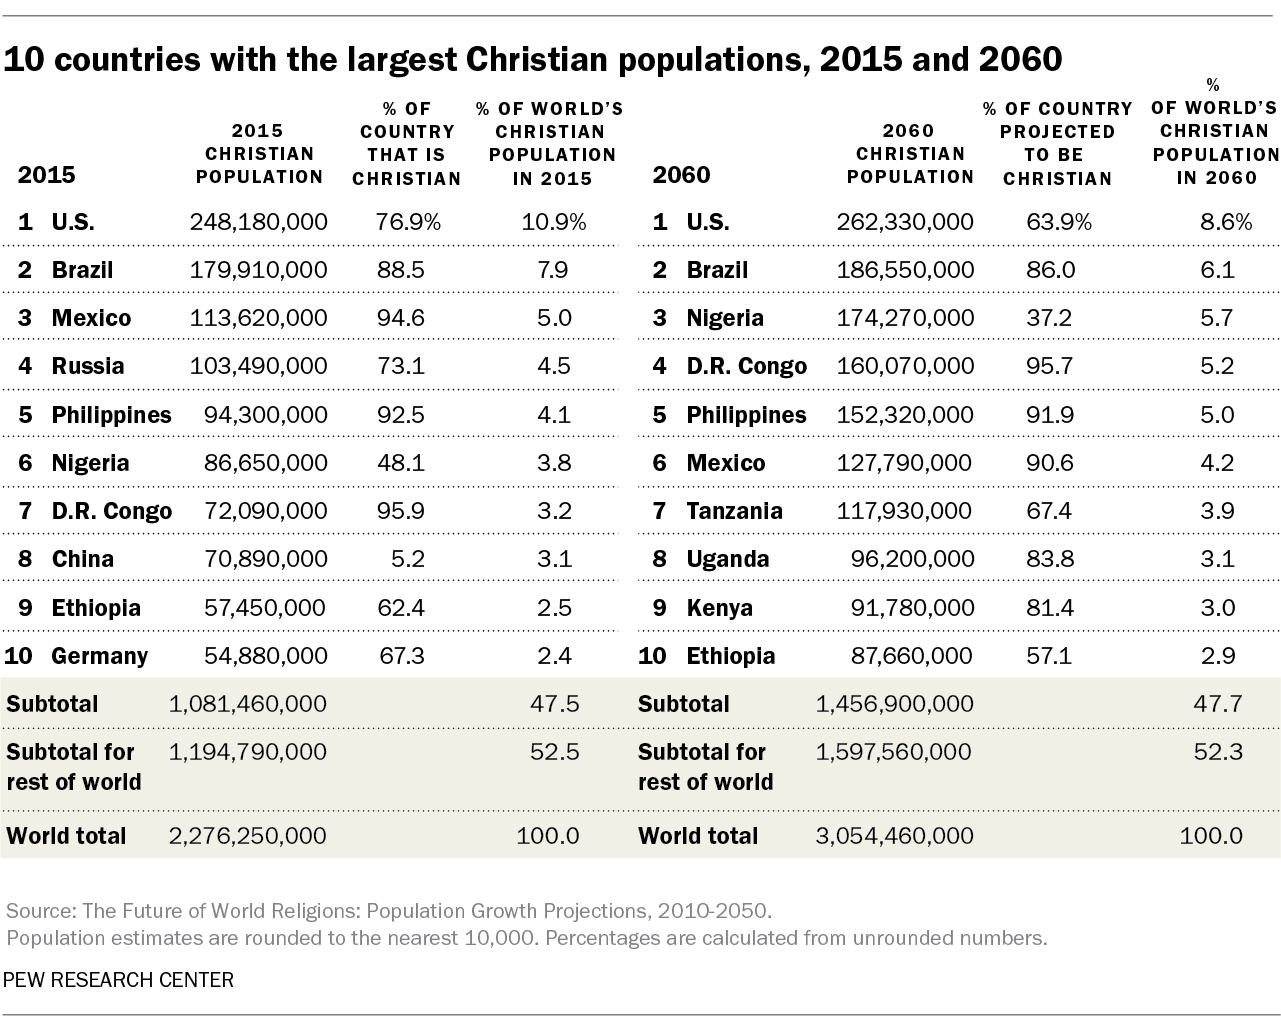 10 countries with the largest Christian populations, 2015 and 2060